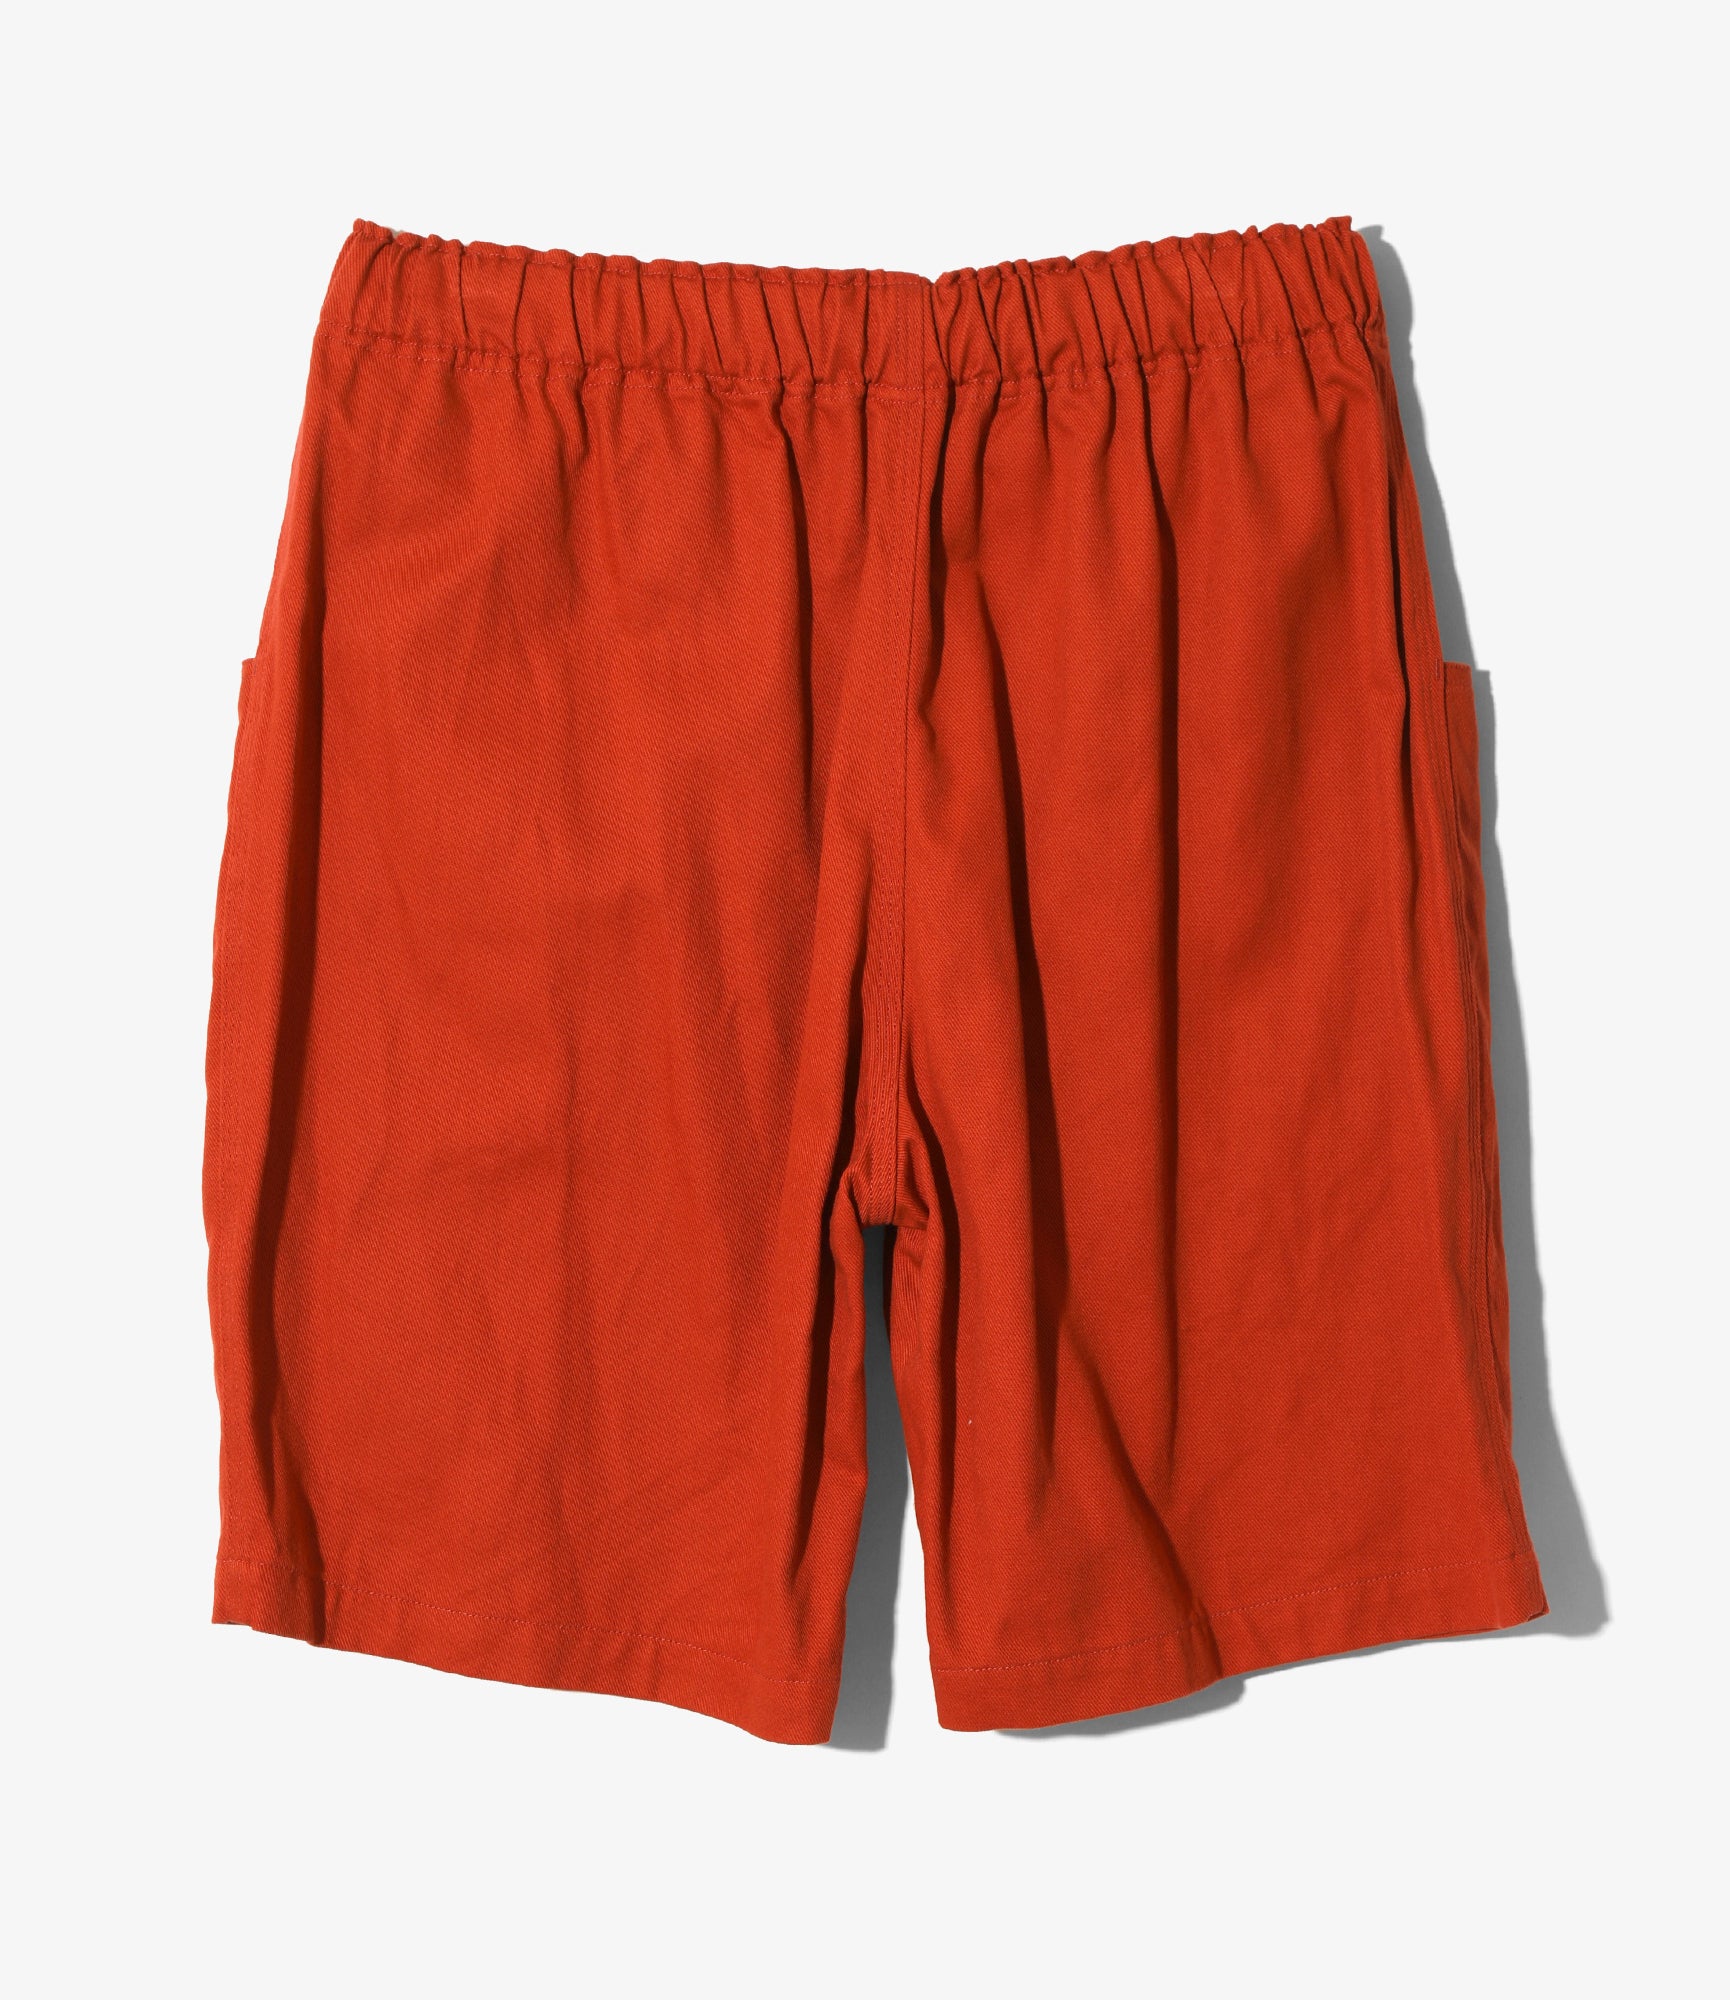 C.S. Short - Coral Red - Cotton Twill